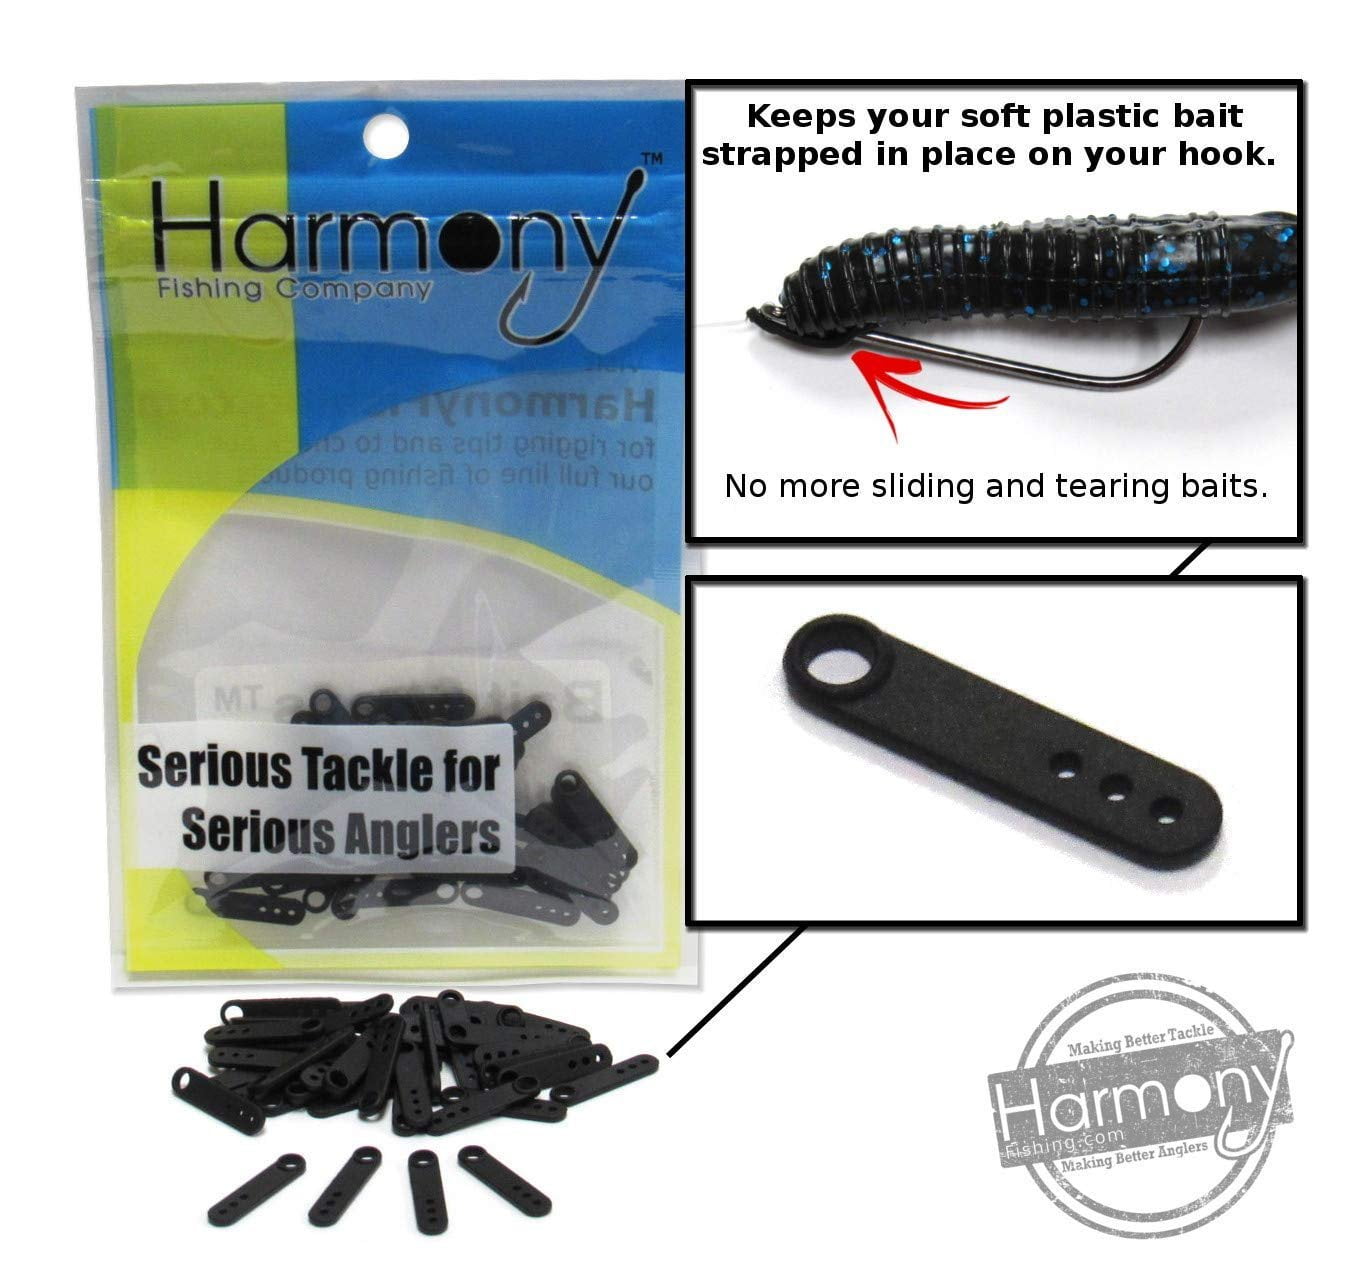 Harmony Bait Straps 40 Pack - Secure Your Soft Plastic baits on Your Hook  to Prevent Sliding and Tearing